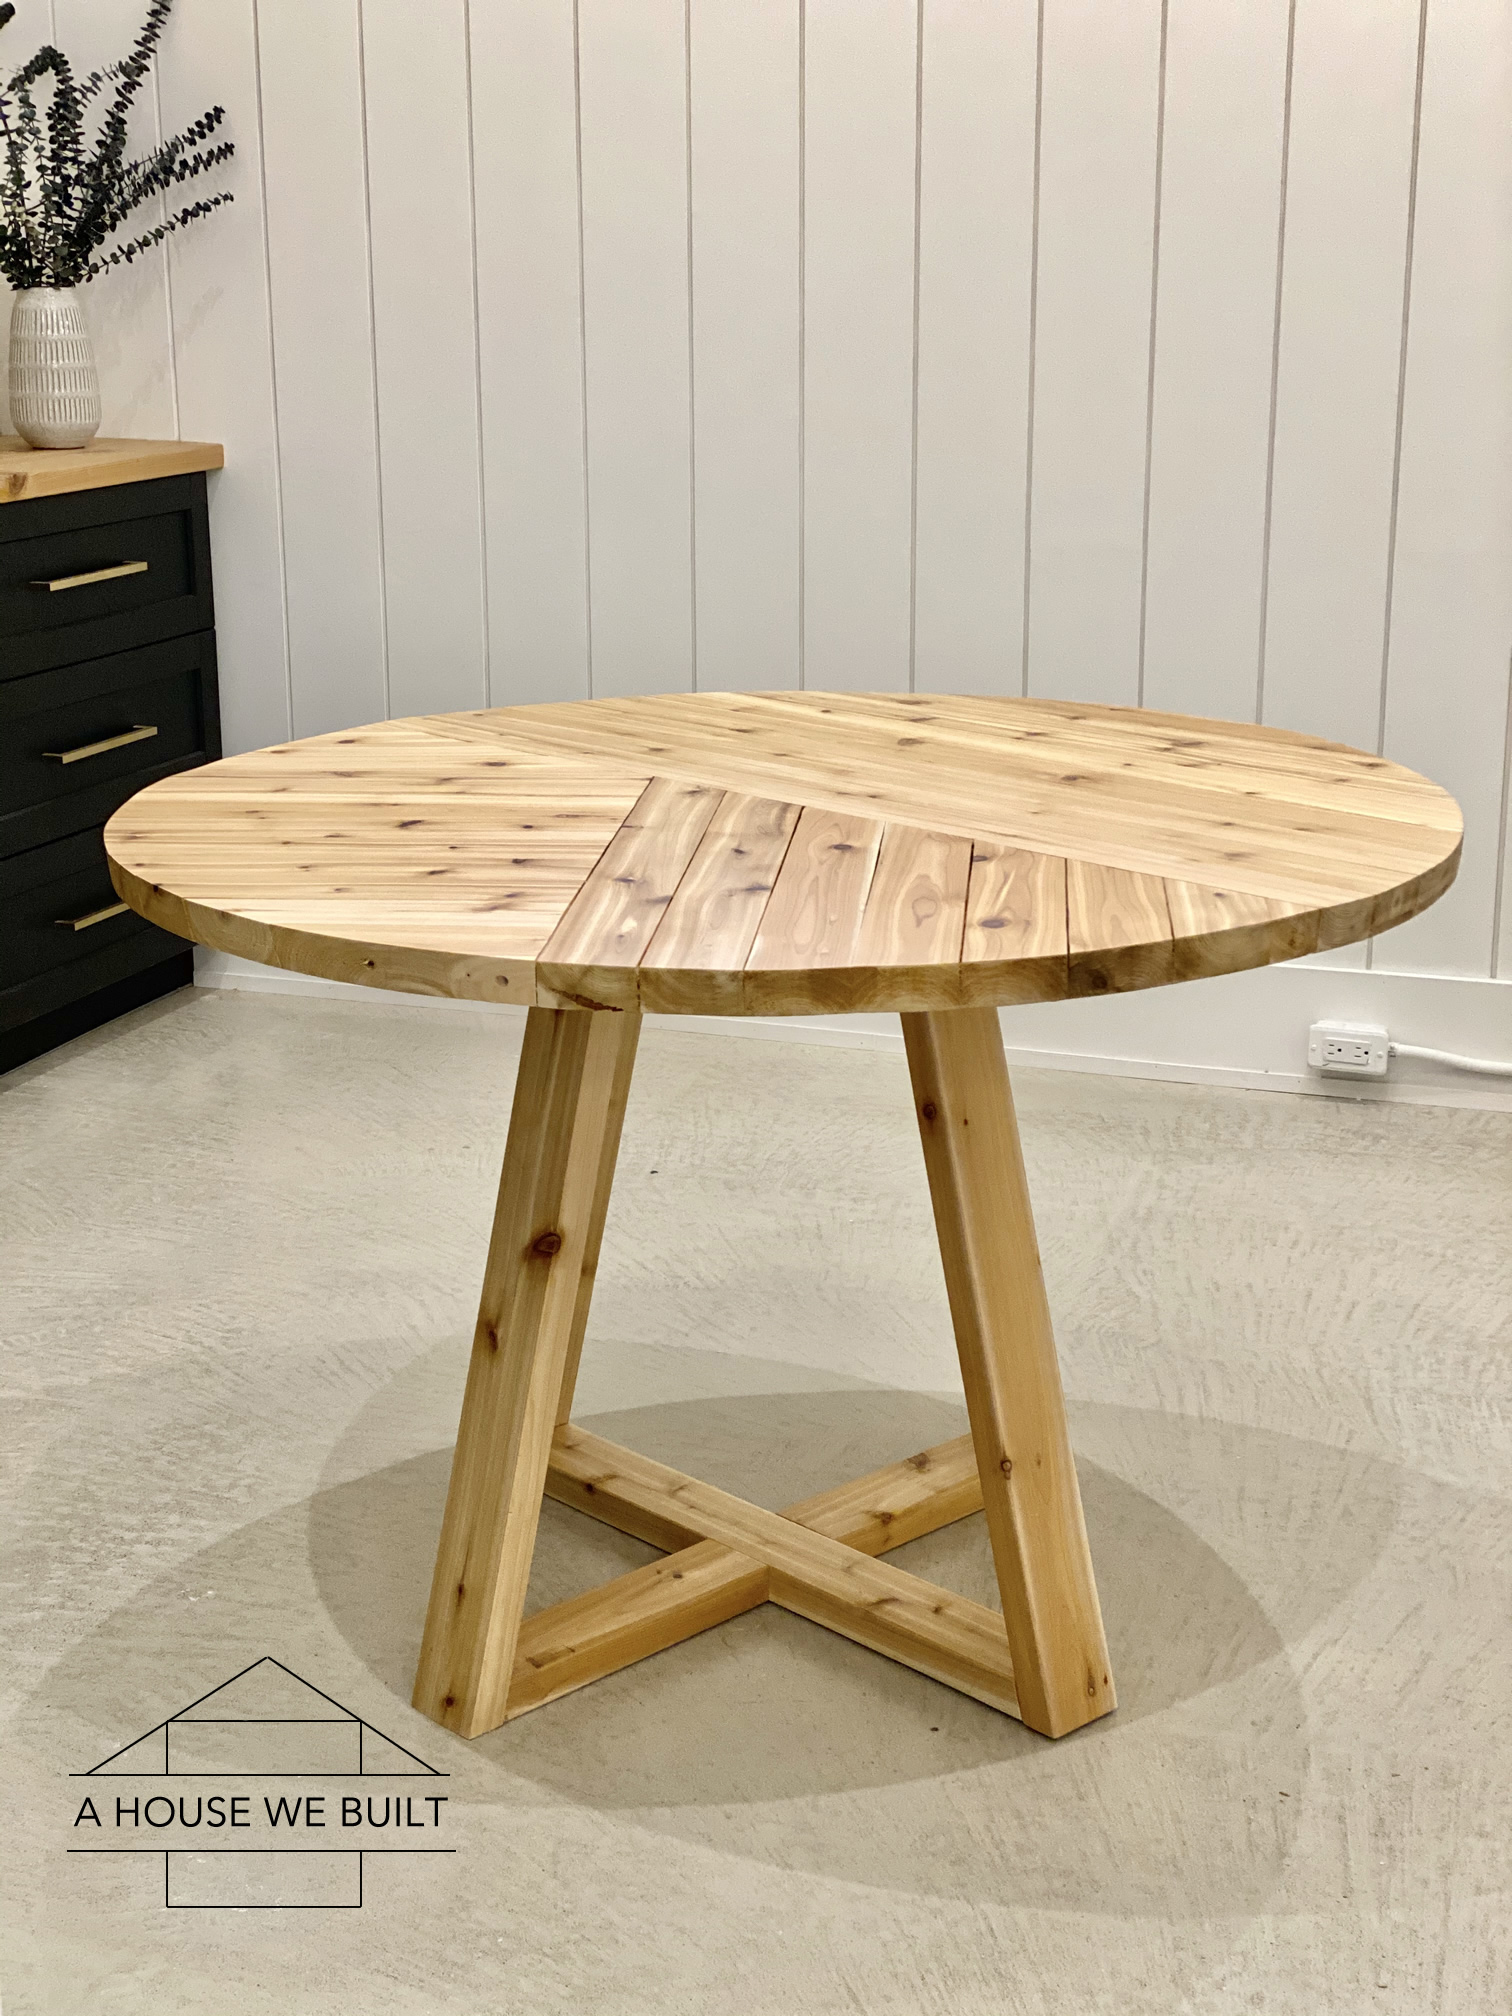 How To Build A Round Table, How To Make A Circular Table